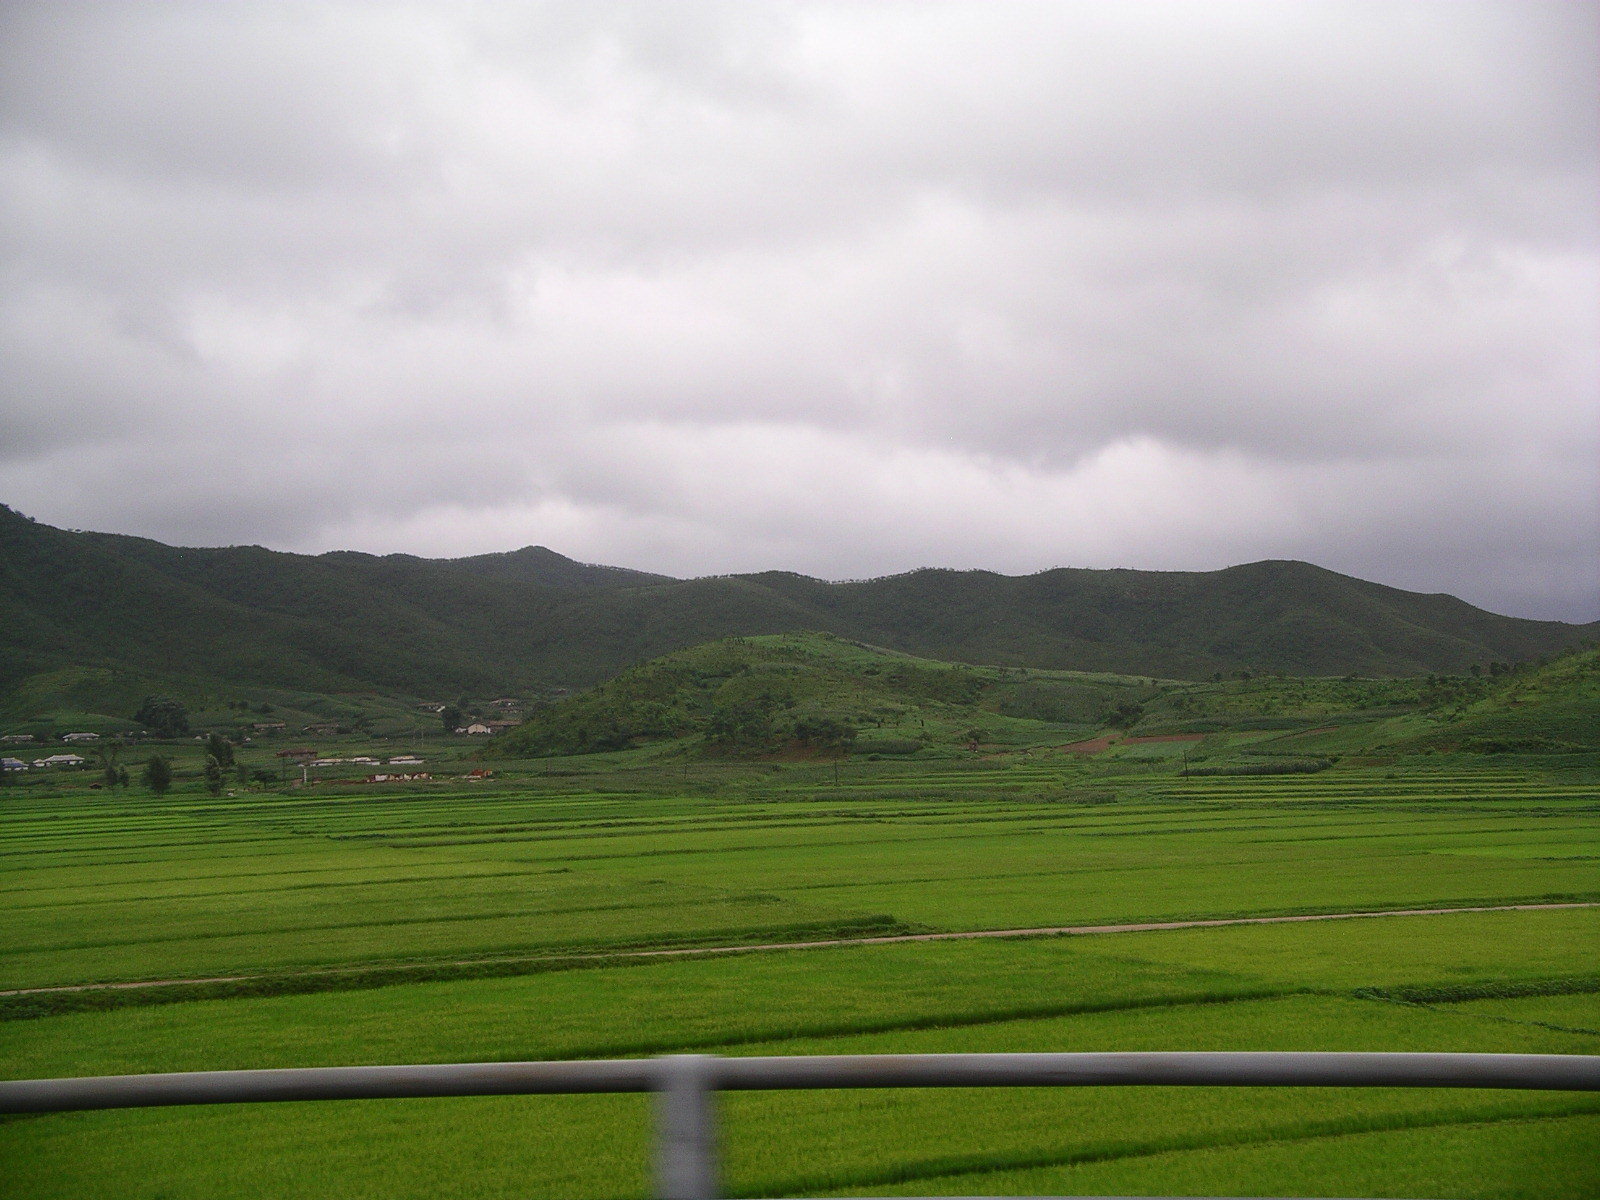 Green rain soaked field with hills in the background